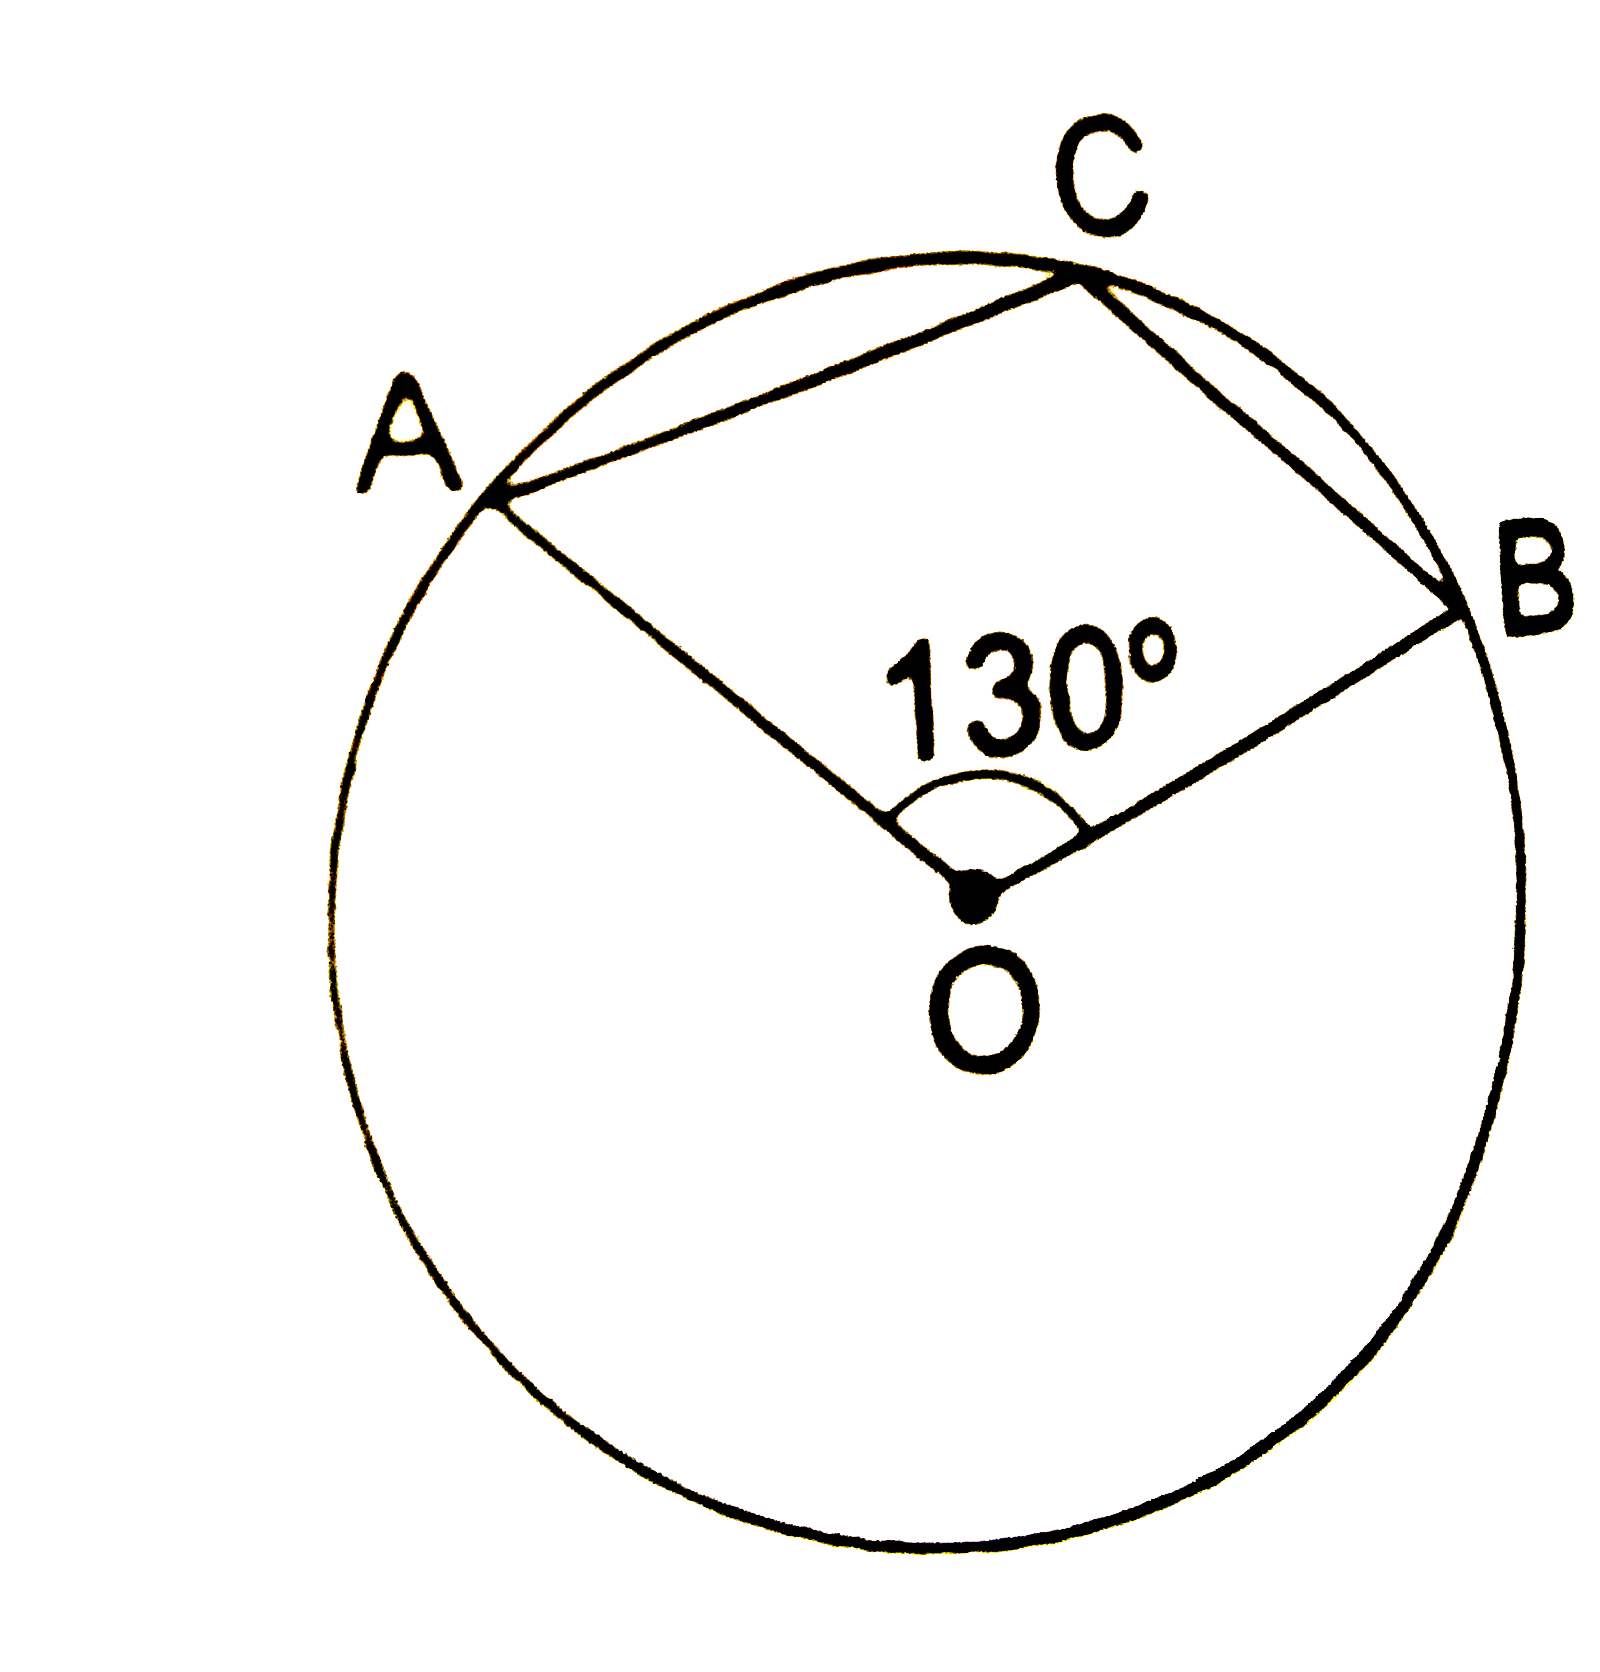 In the given figure , Ois the centre of a circle and / AOB = 130^(@). Then / ACB = ?